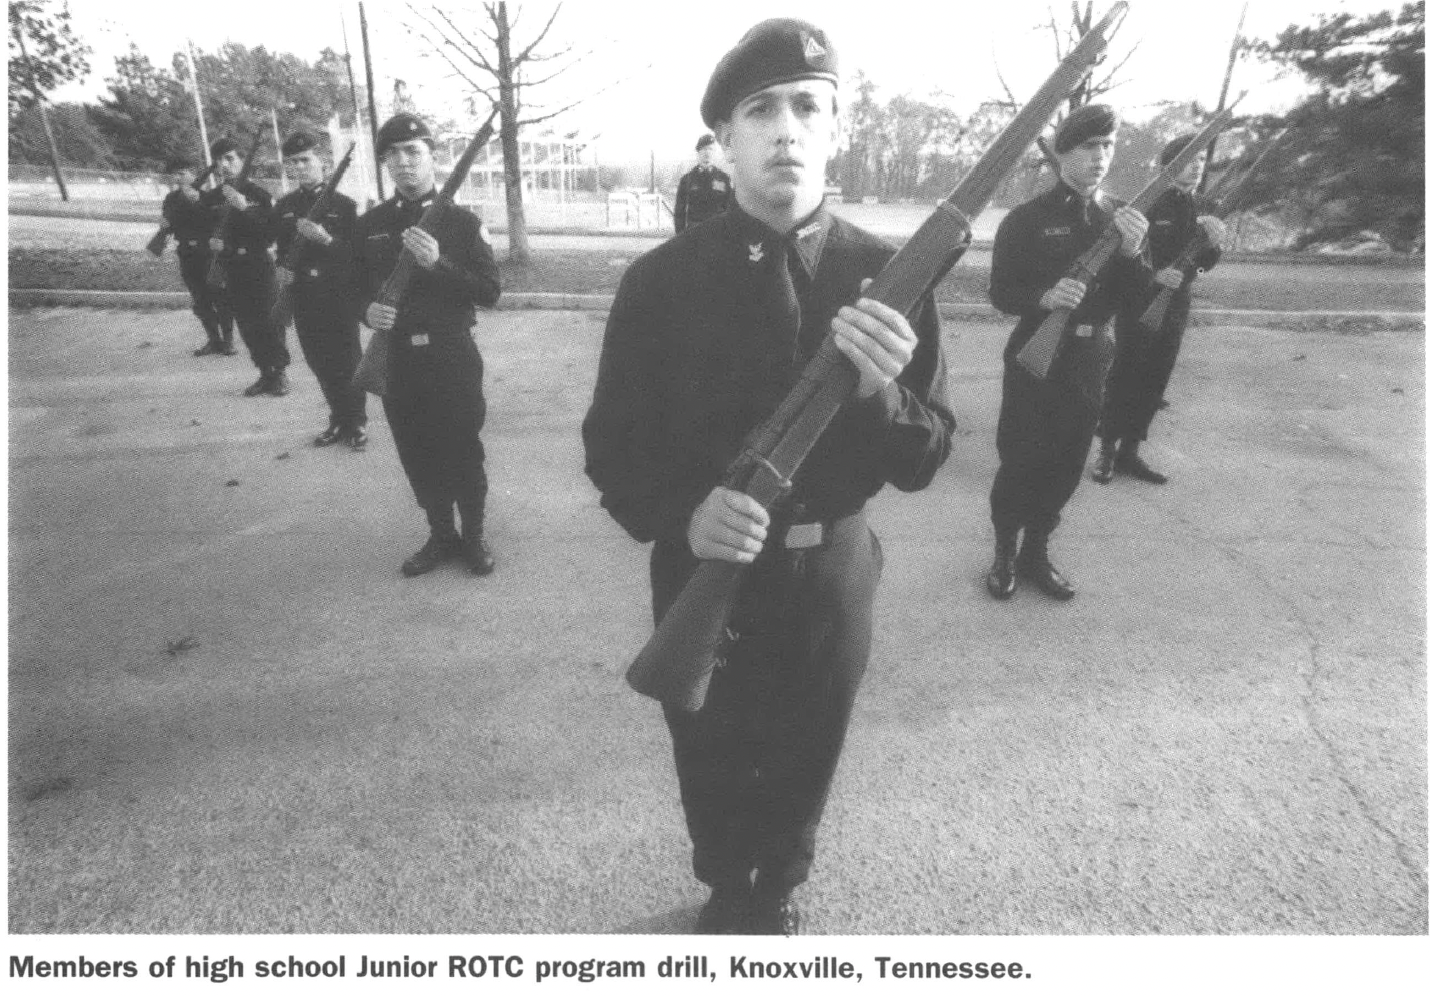 Children in military formation holding guns